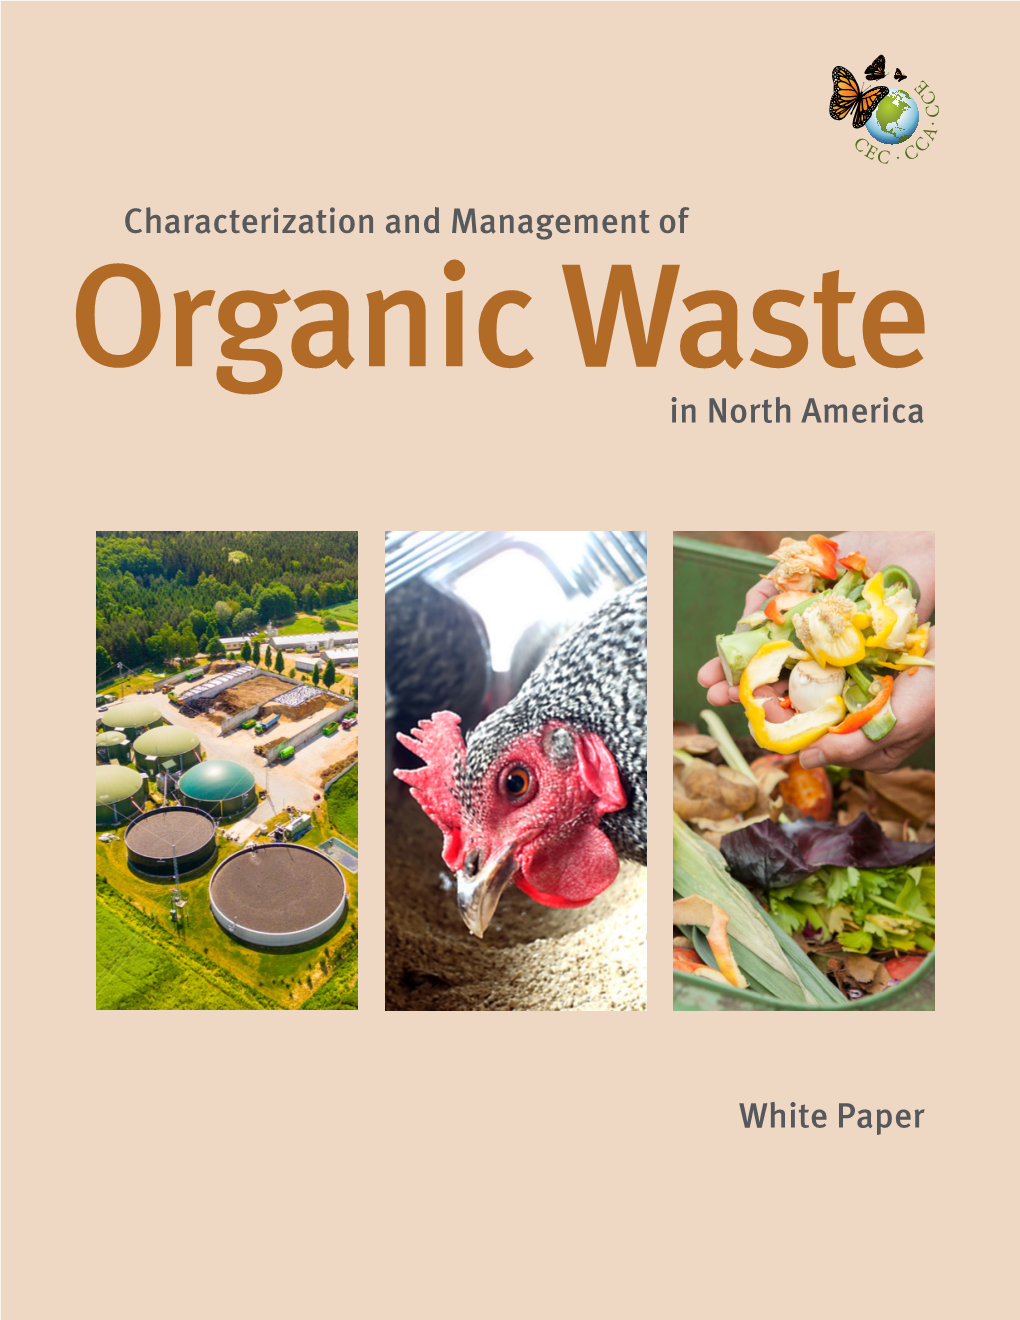 Characterization and Management of Organic Waste in North America